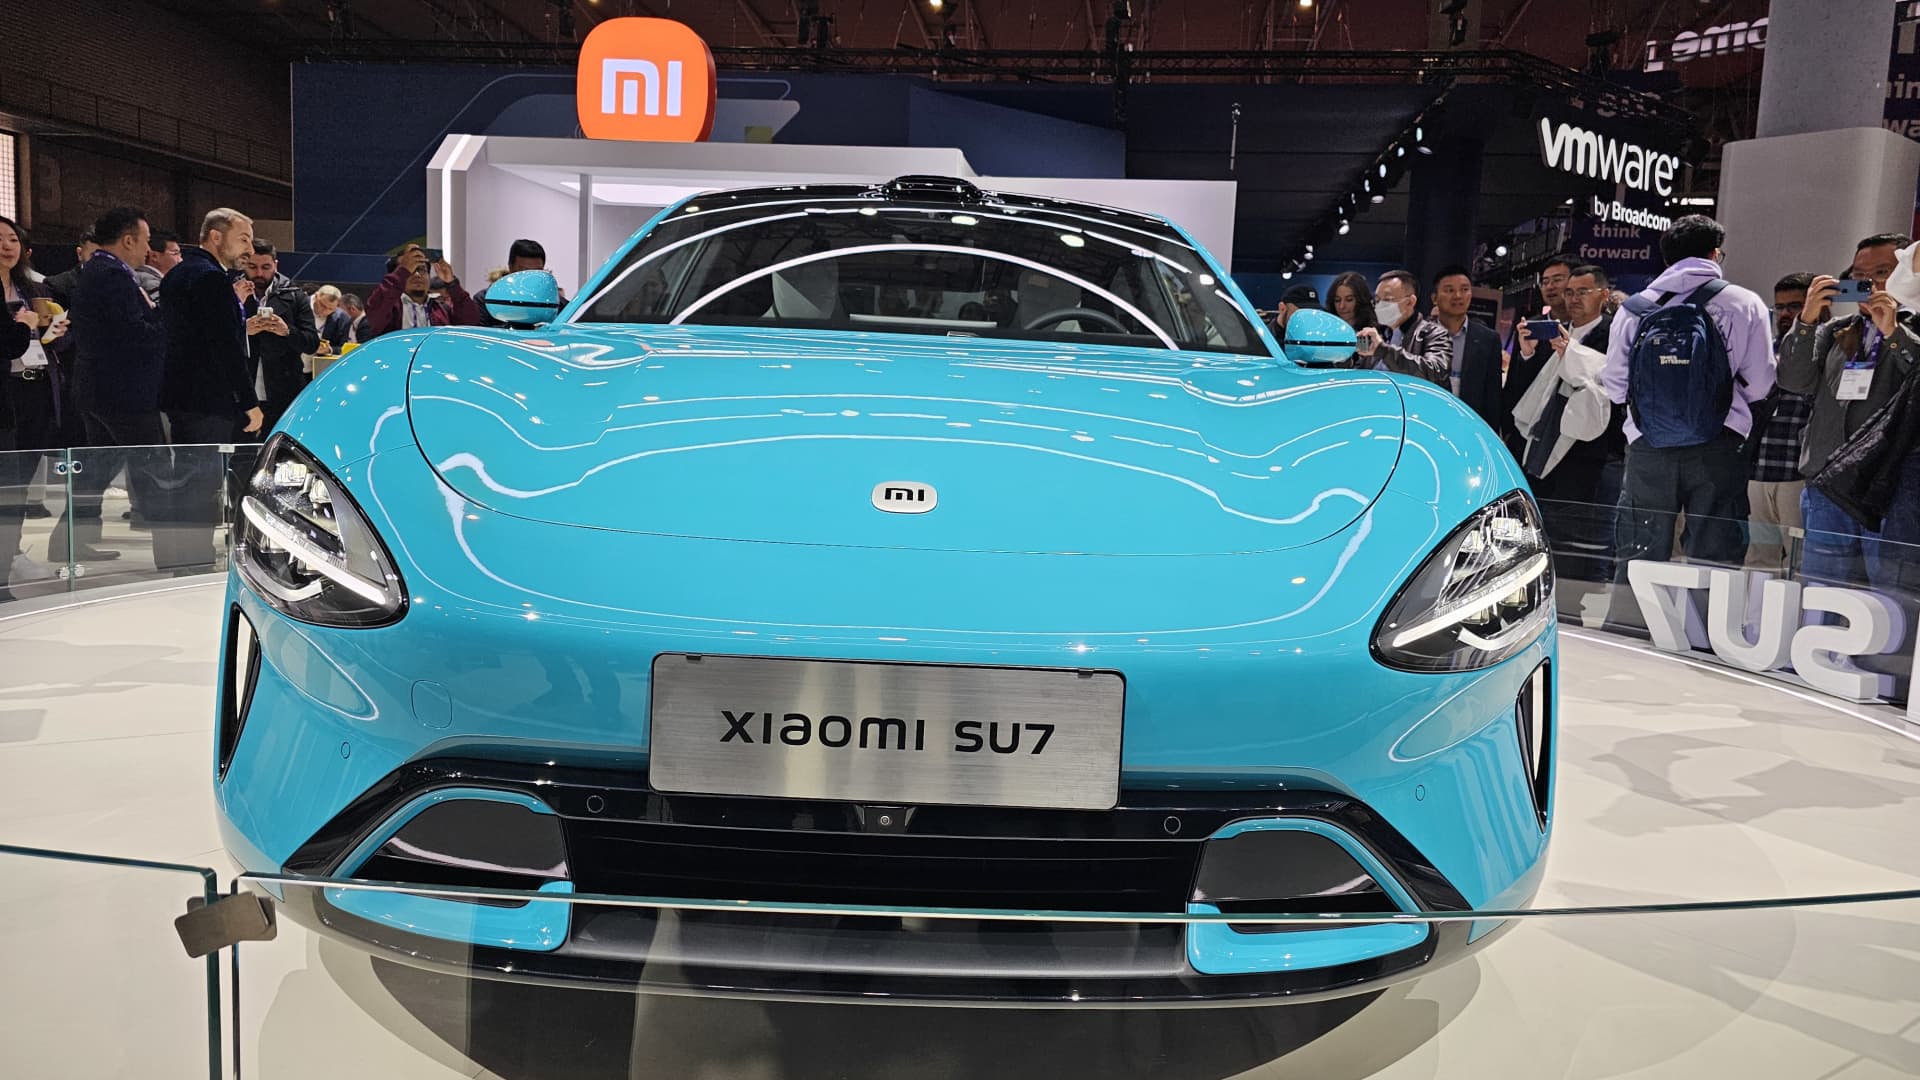 China’s Xiaomi is providing extra EVs than predicted, increasing hopes it can crack even faster